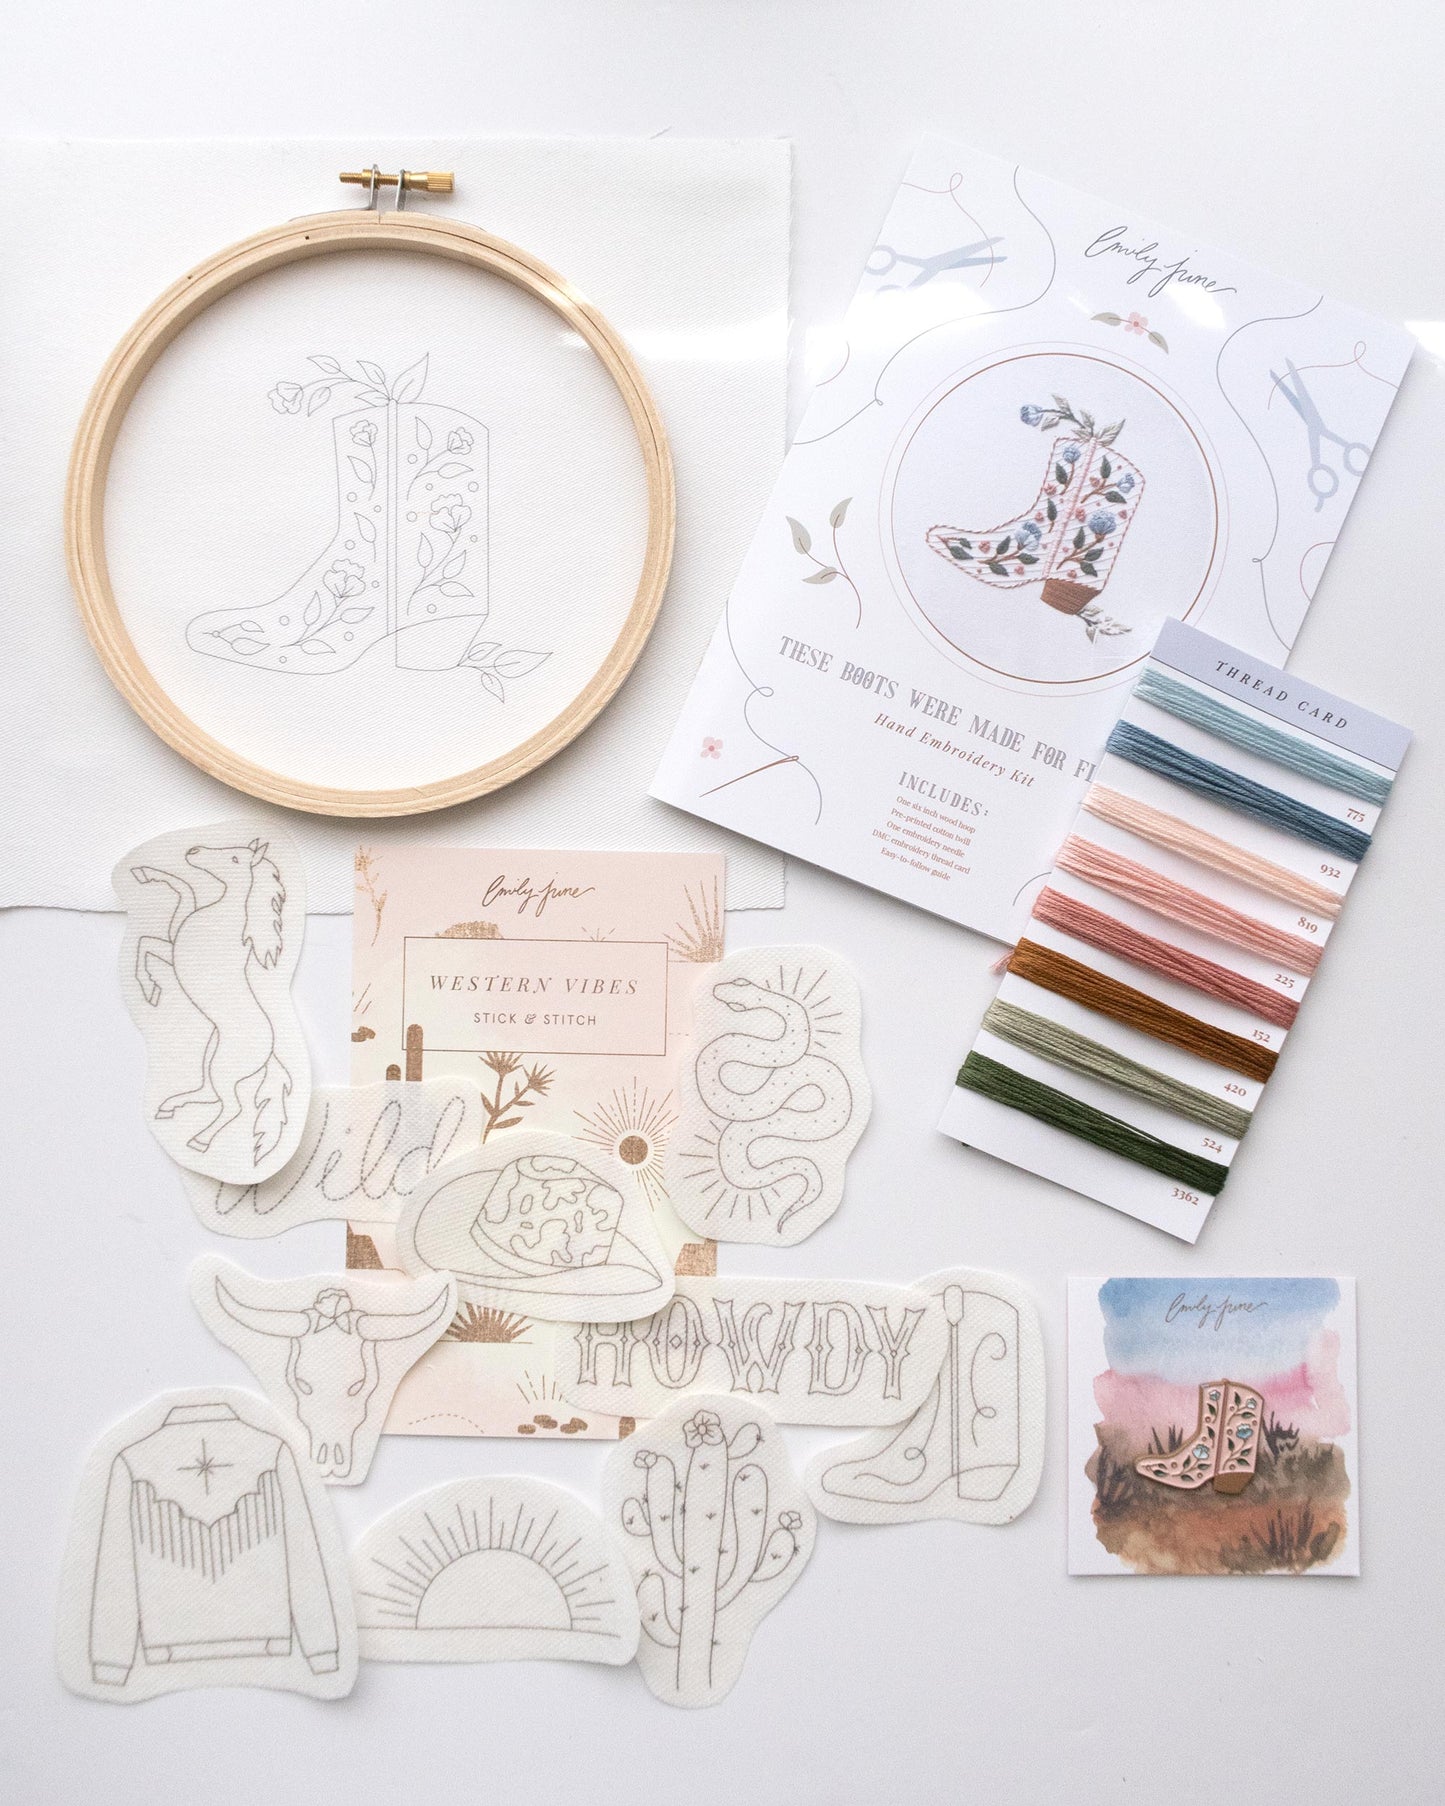 Southwest themed embroidery bundle with embroidery kit that includes wood embroidery hoop, printed embroidery fabric, embroidery needle, embroidery floss, and embroidery guide, and pink cowboy boot enamel needle nanny or needle minder, and western themed clothing embroidery stitch and stick pack with horse, wild in rope font, cow print cowboy hat, cowboy boot, howdy in western font, sunrise, western fringe jacket, boho floral skull, and boho snake design